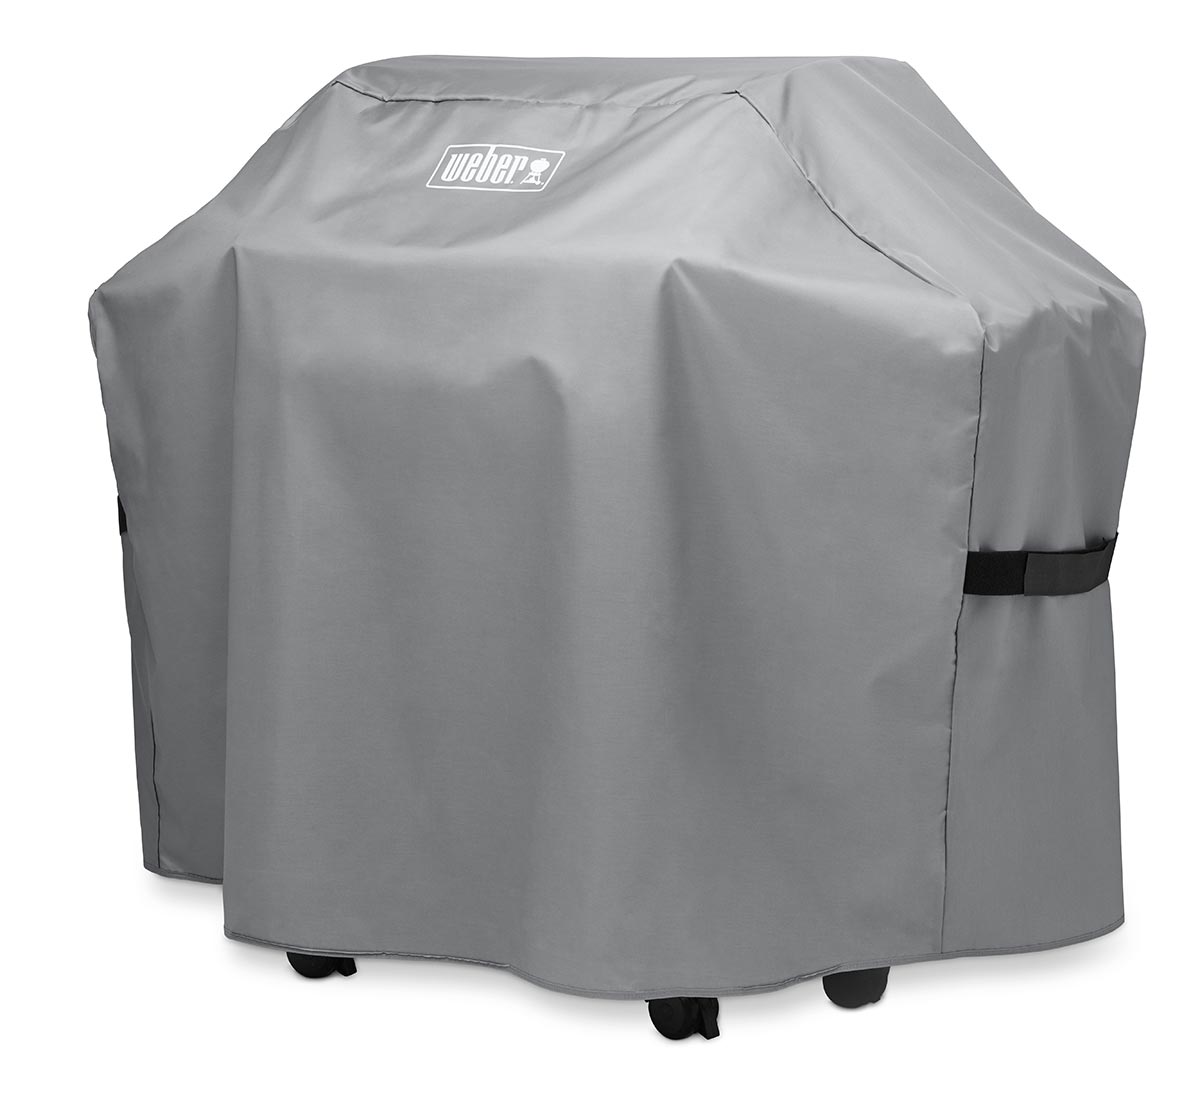 weber-barbecue-cover_7178.jpg